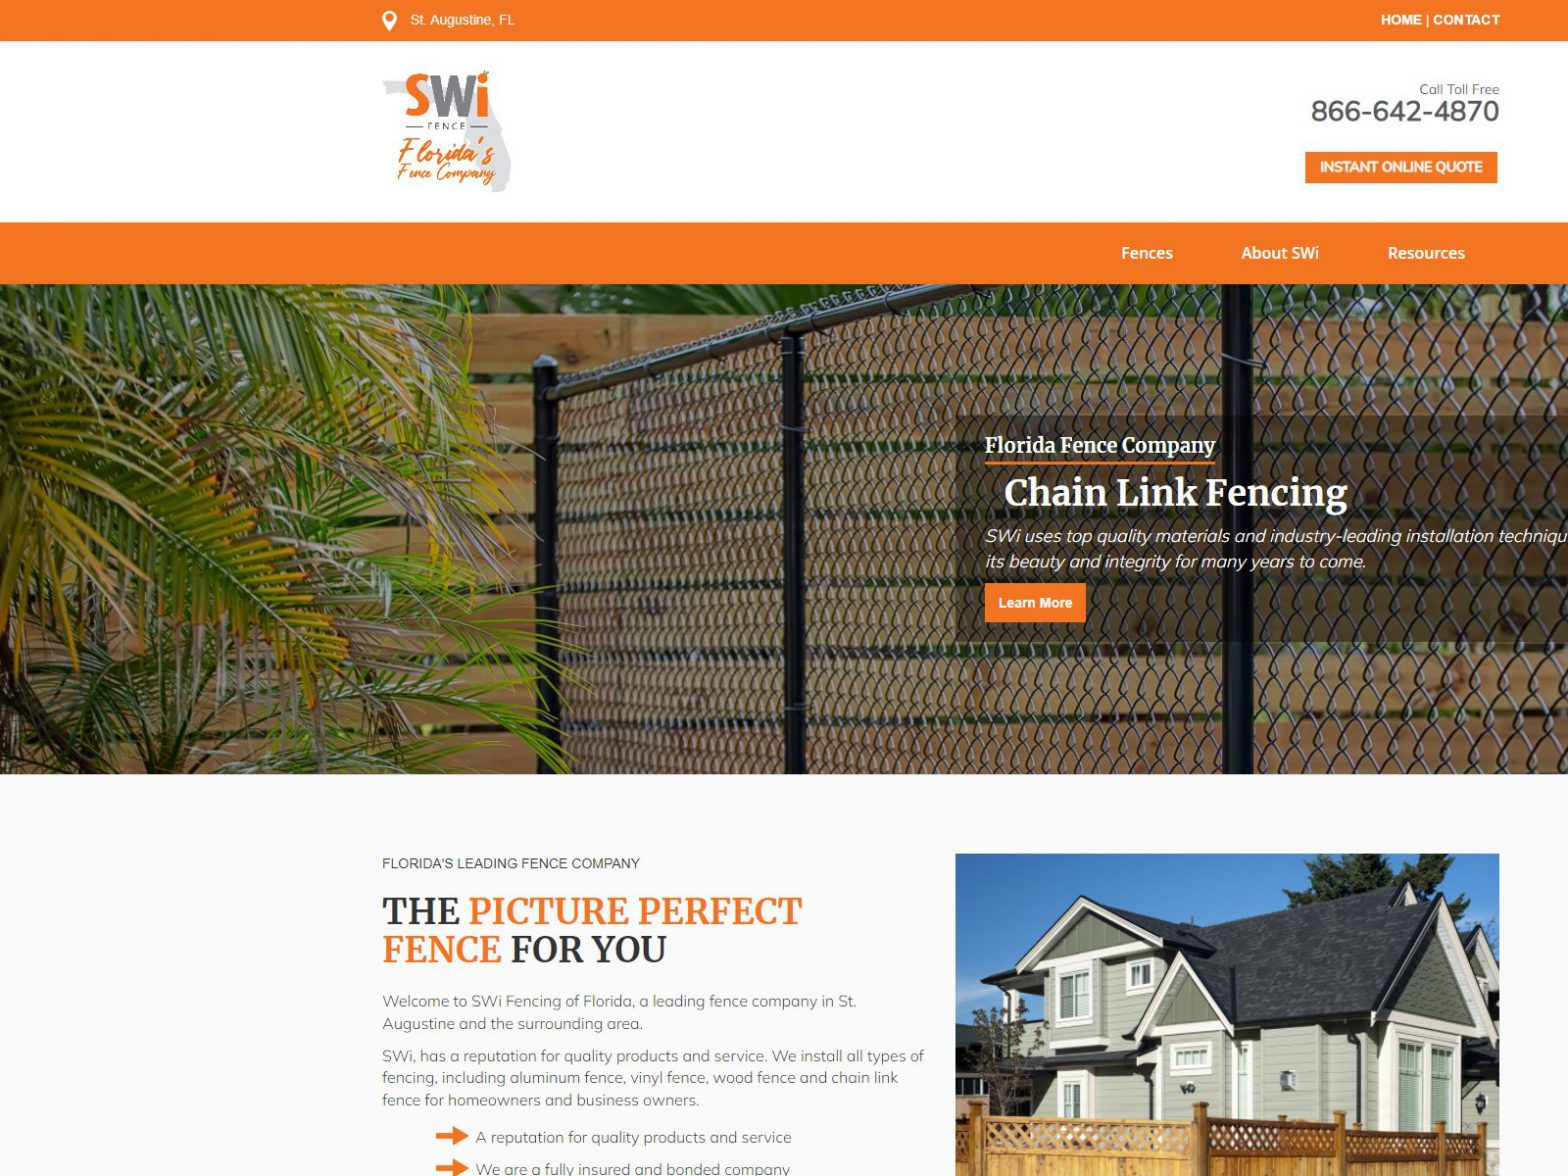 We are SWi Fence: Your St. Augustine, Florida Fence Company